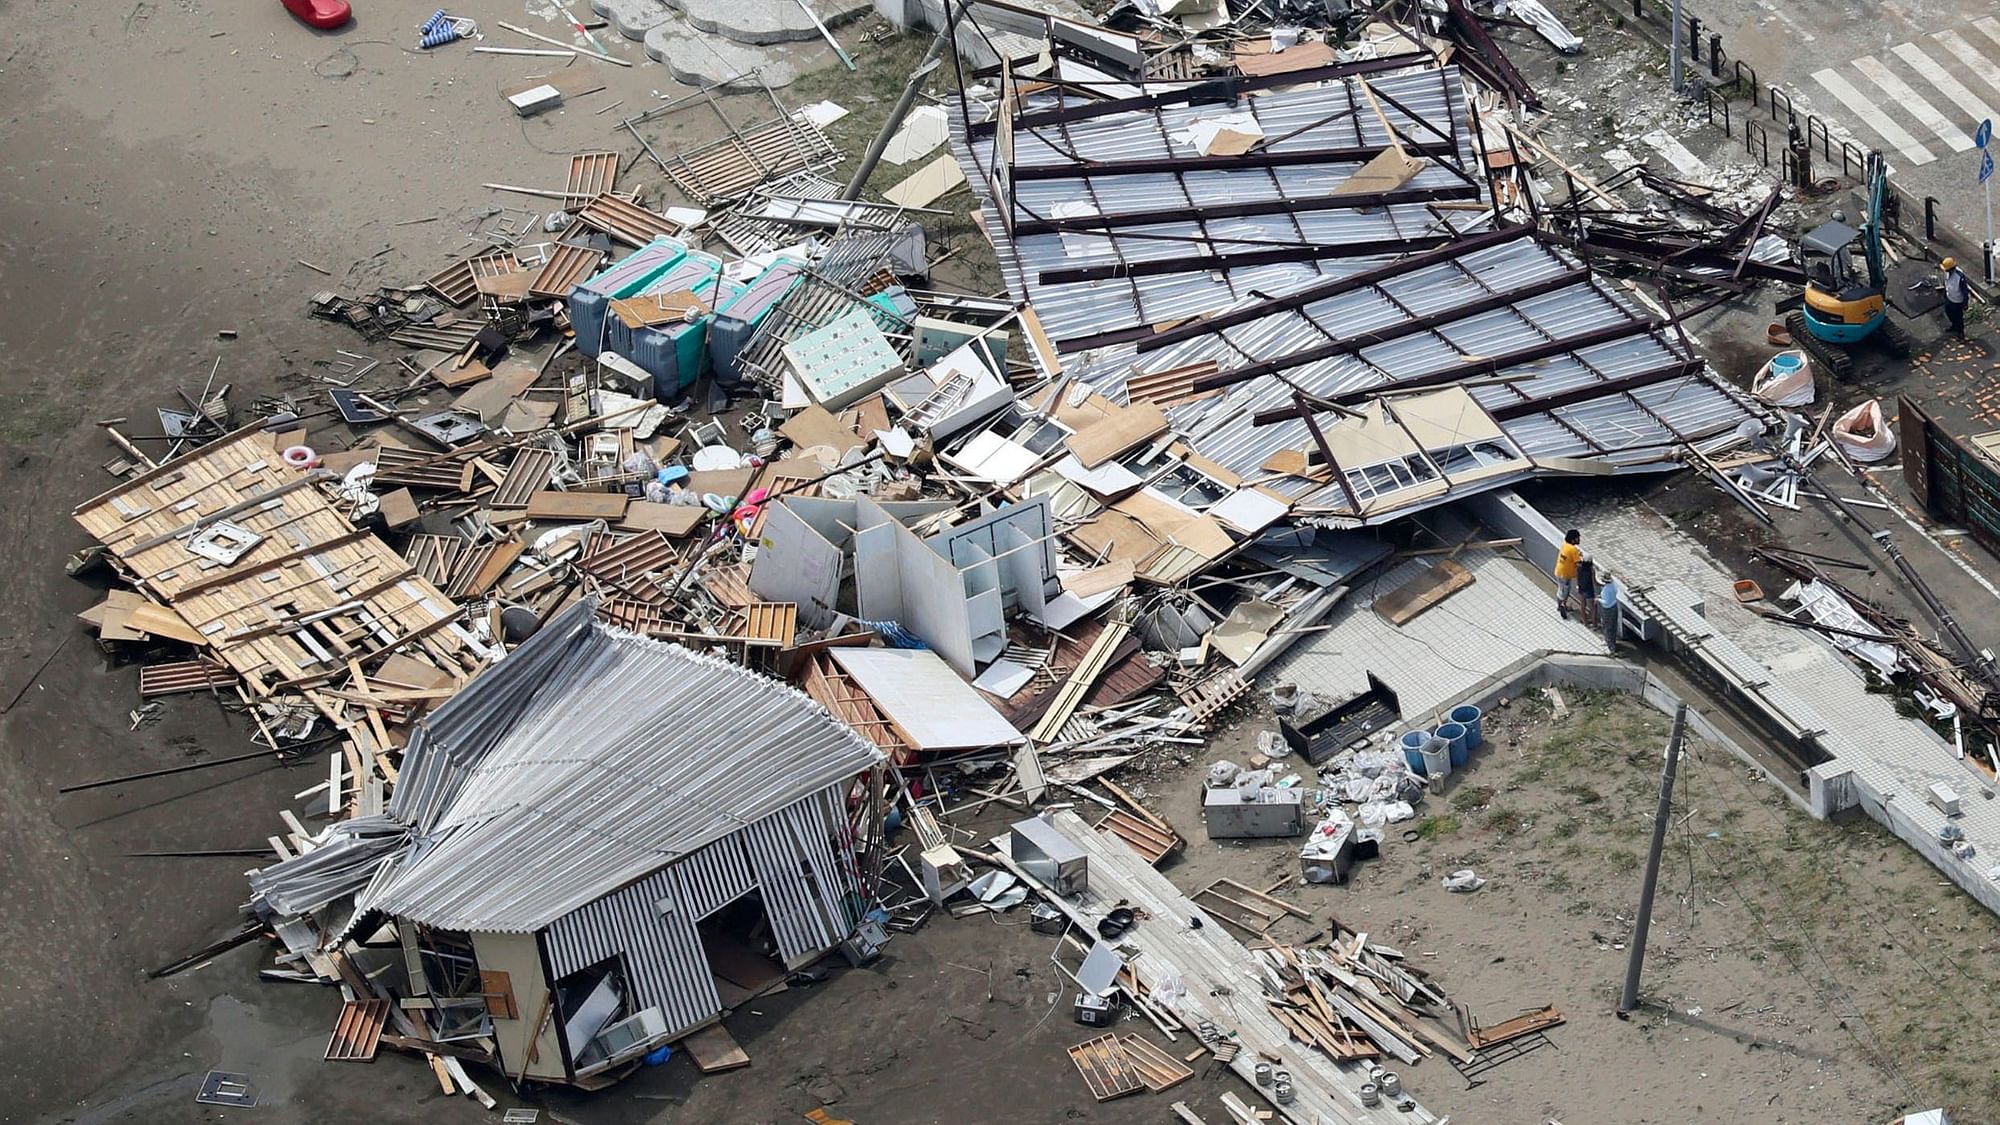 Beach houses are damaged as typhoon hits the beacfront area in Miura, south of Tokyo, Monday, 9 September, 2019.